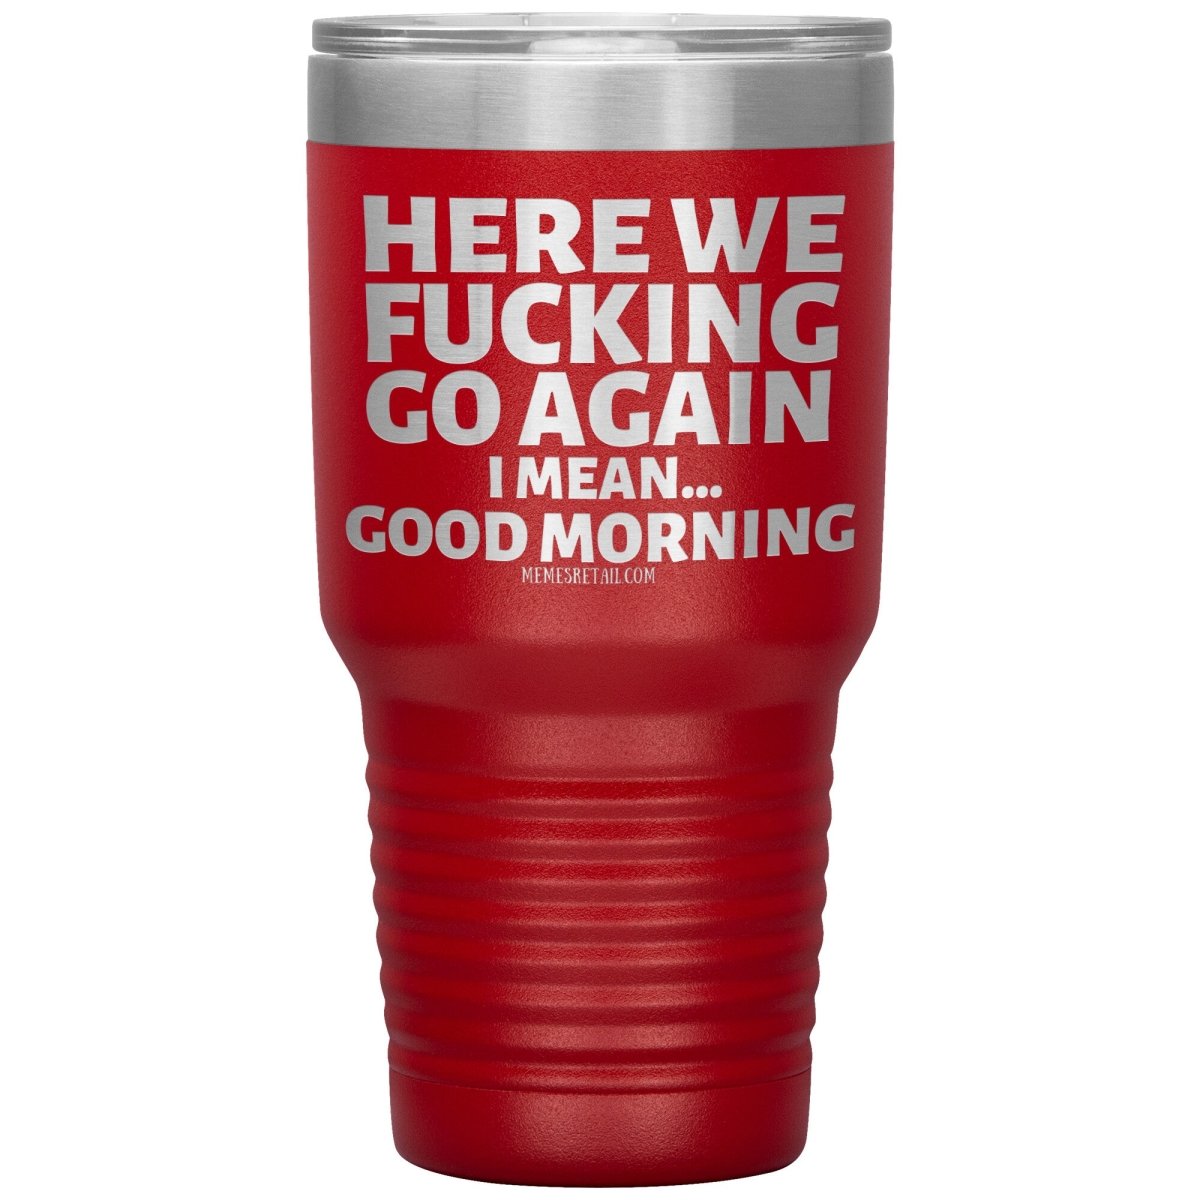 Here We Fucking Go Again, I mean...good morning - Big Lettering Tumblers, 30oz Insulated Tumbler / Red - MemesRetail.com